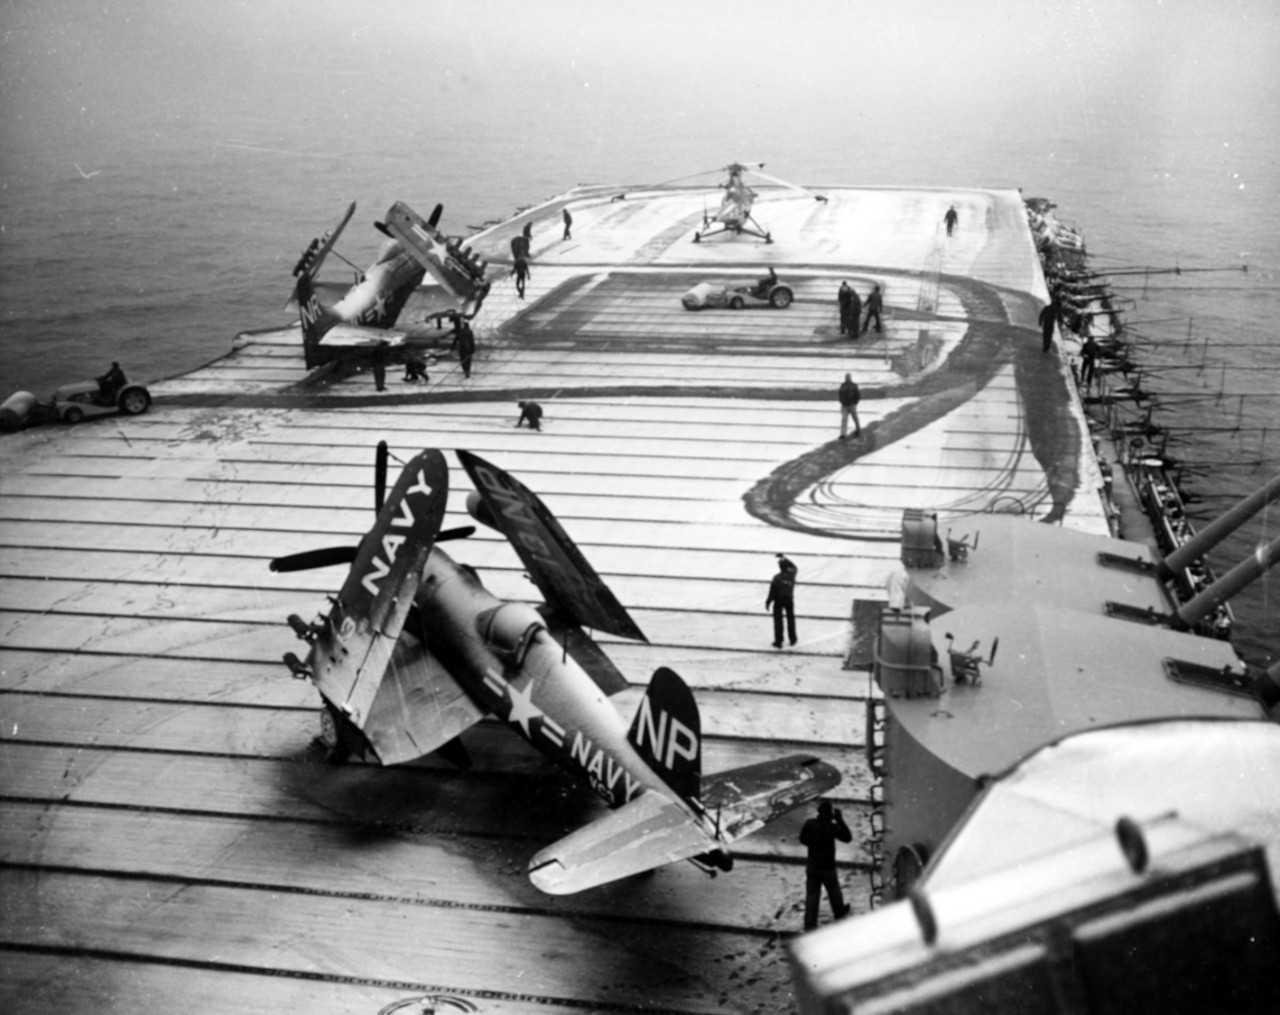 Photo #: 80-G-428267  USS Valley Forge (CV-45)